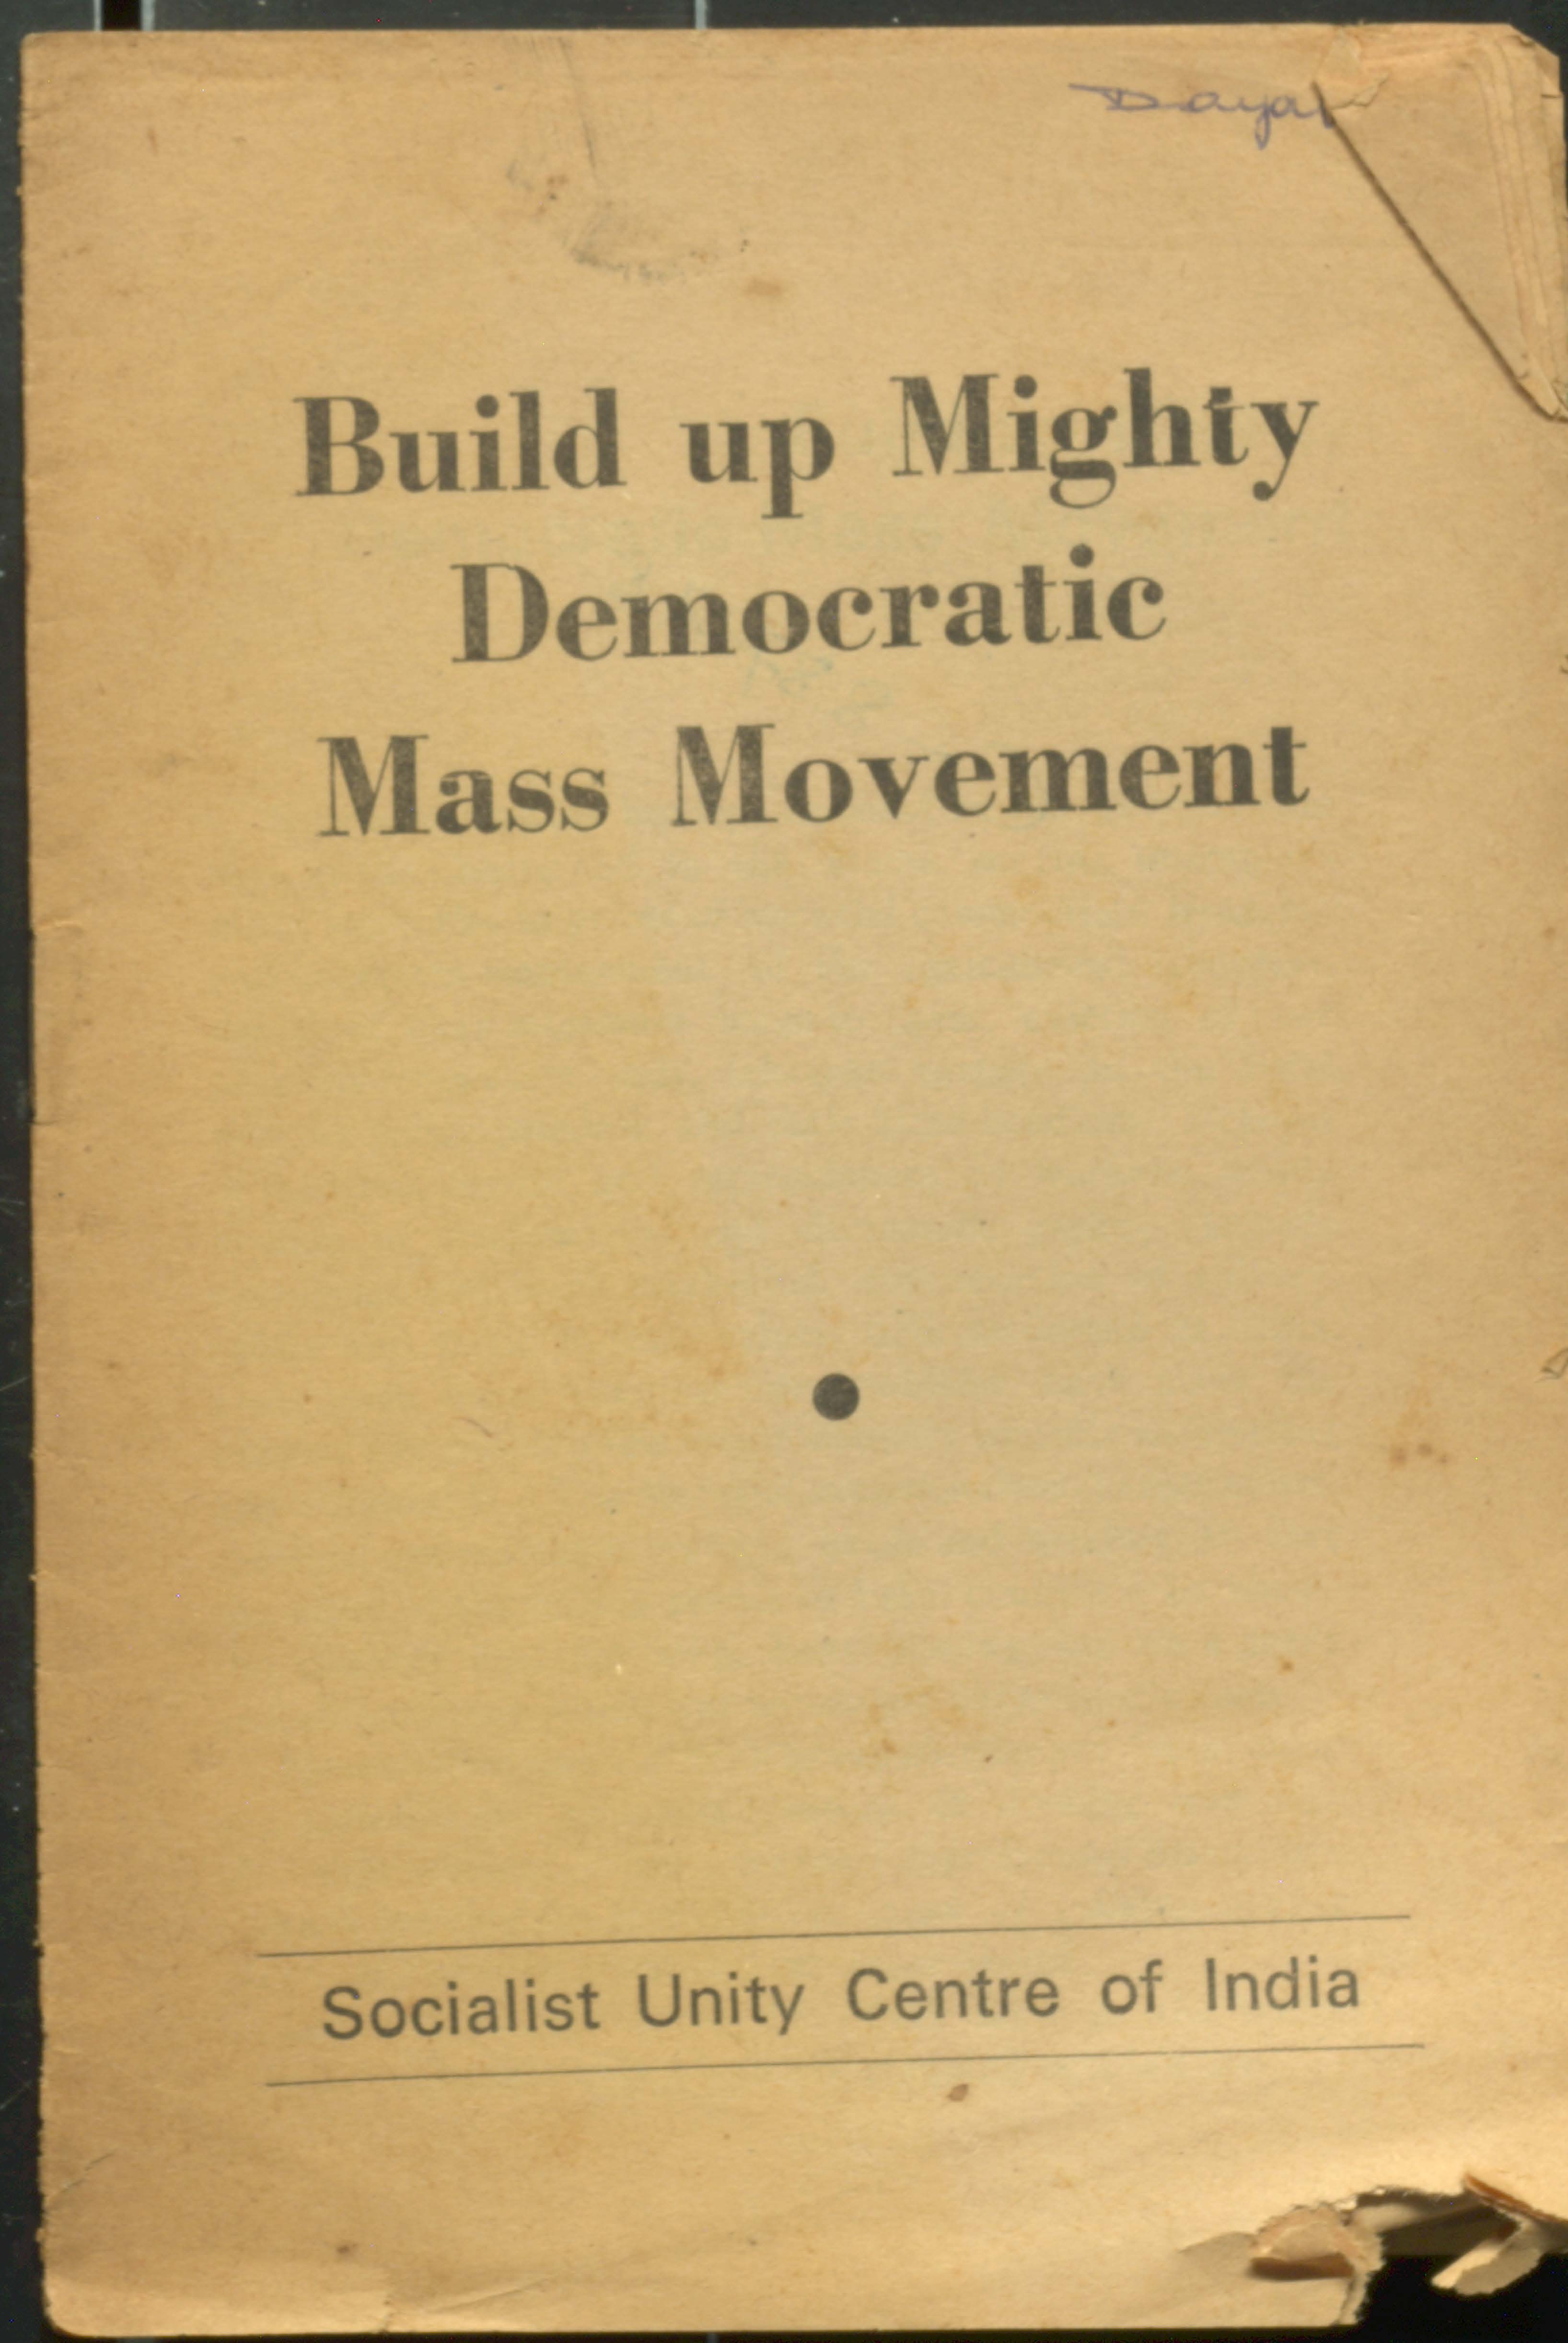 Build Up Mighiy Democratic Mass Movement